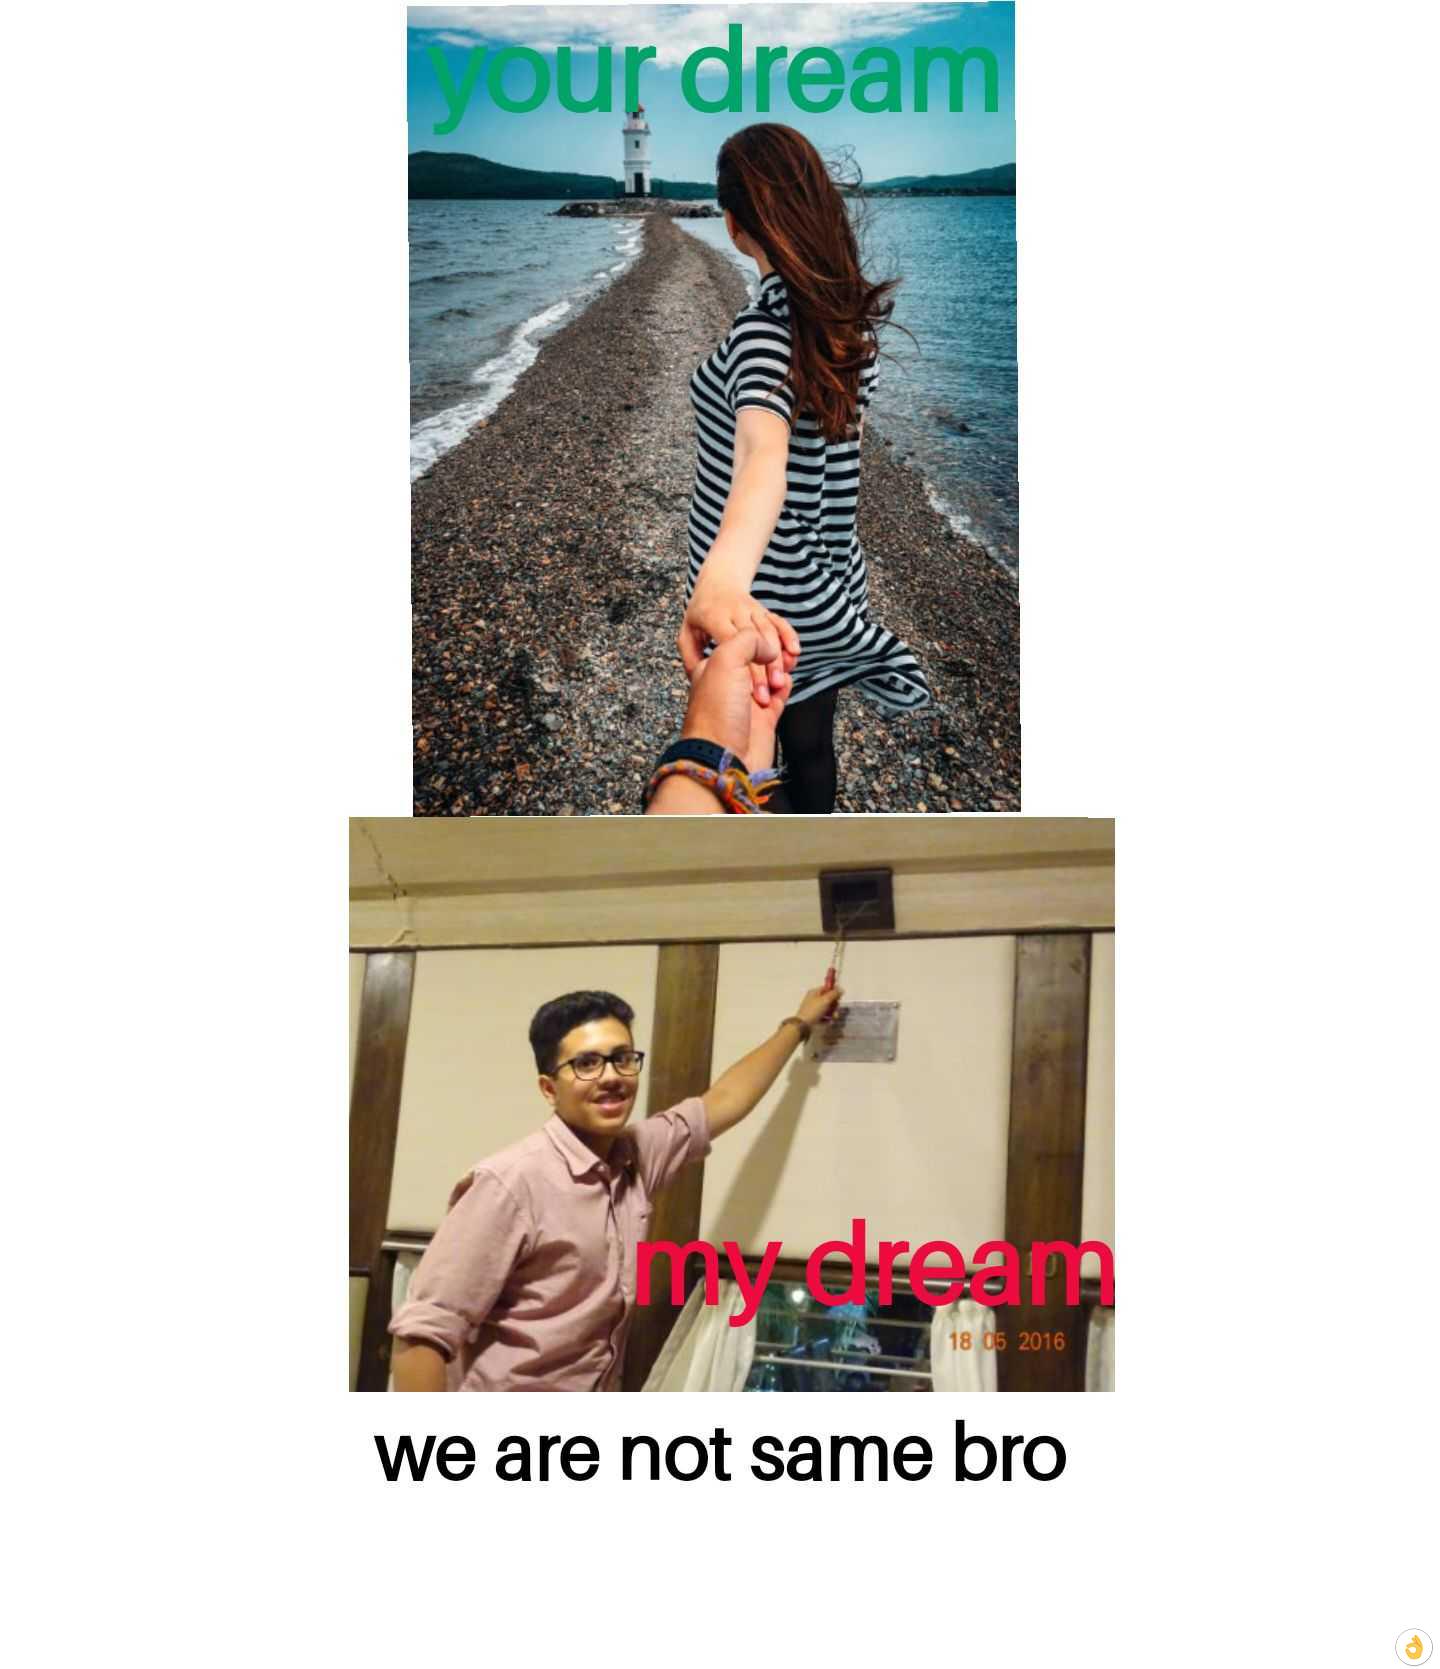 We are not the same